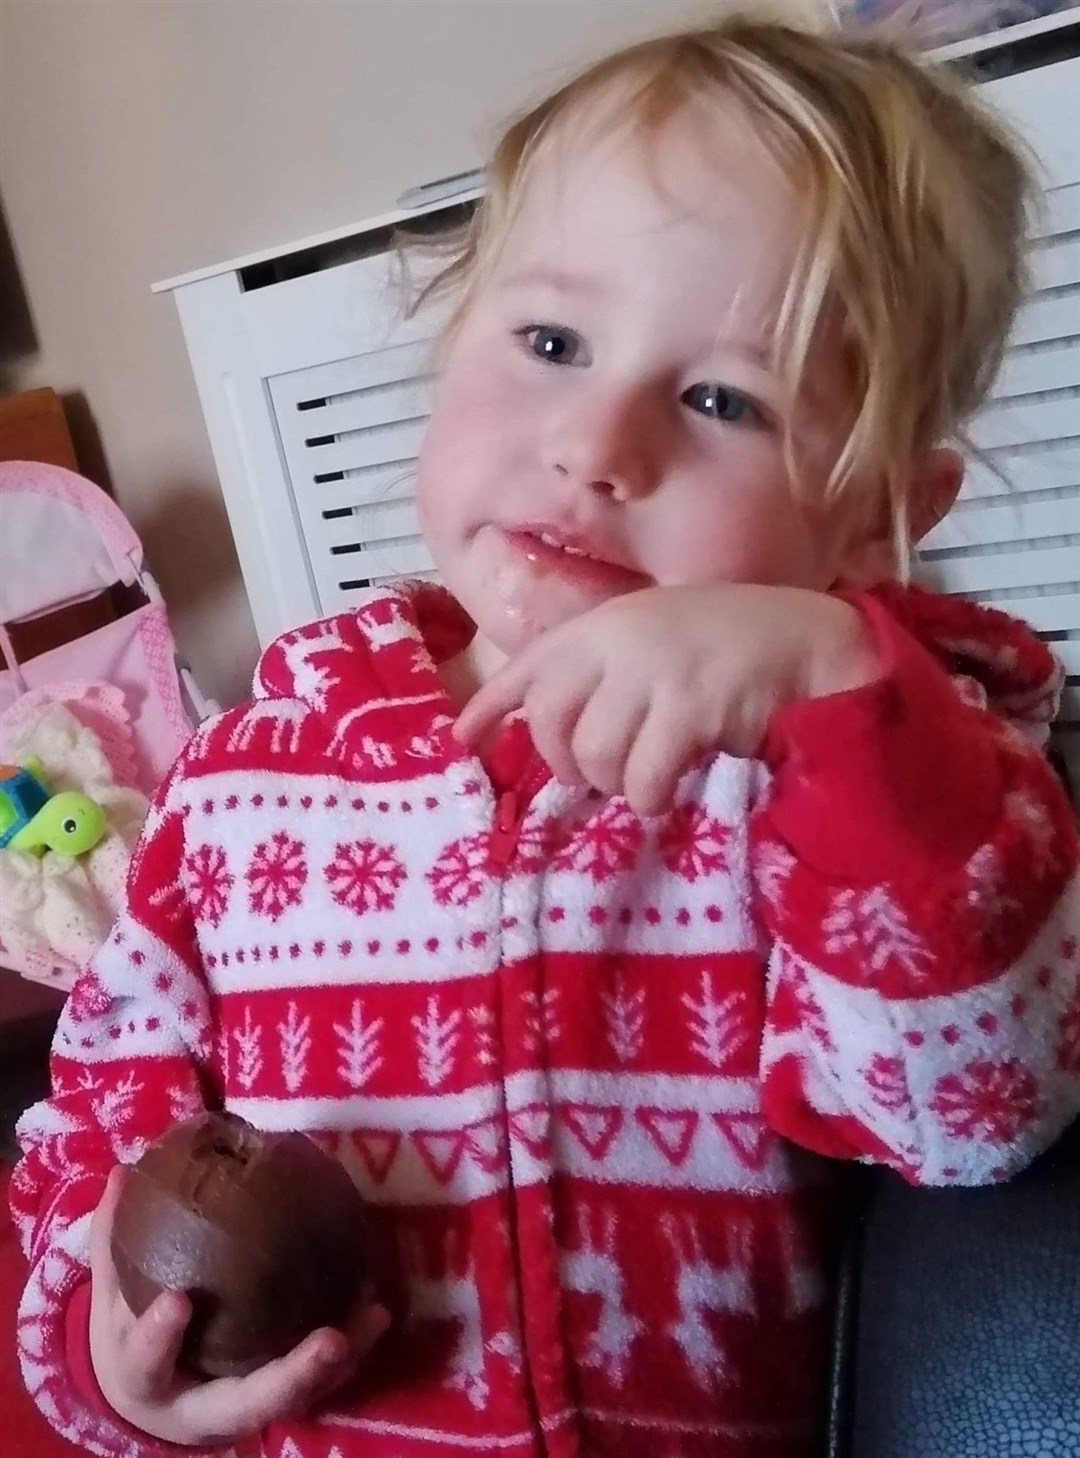 Two-year-old Lola James suffered a ‘catastrophic’ head injury at her home in July 2020 and died in hospital four days later (Family handout/Dyfed-Powys Police/PA)